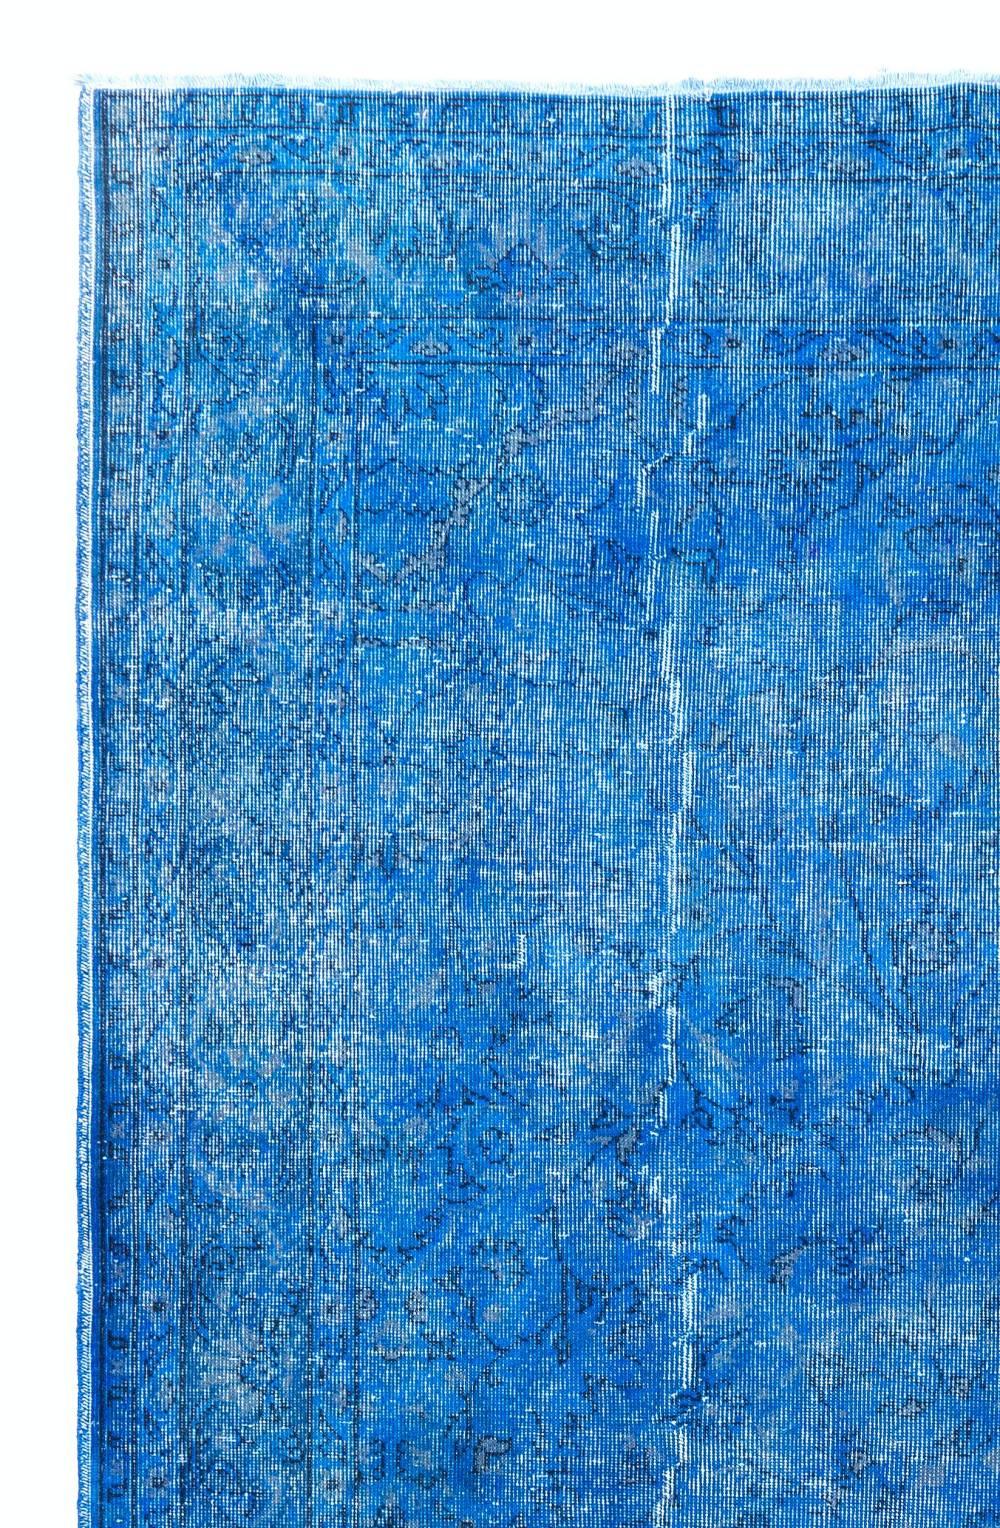 A vintage over-dyed handmade Turkish rug in cerulean blue color. Finely hand knotted, low wool pile on cotton foundation. Deep washed. Sturdy and can be used on a high traffic area, suitable for both residential and commercial interiors.
   